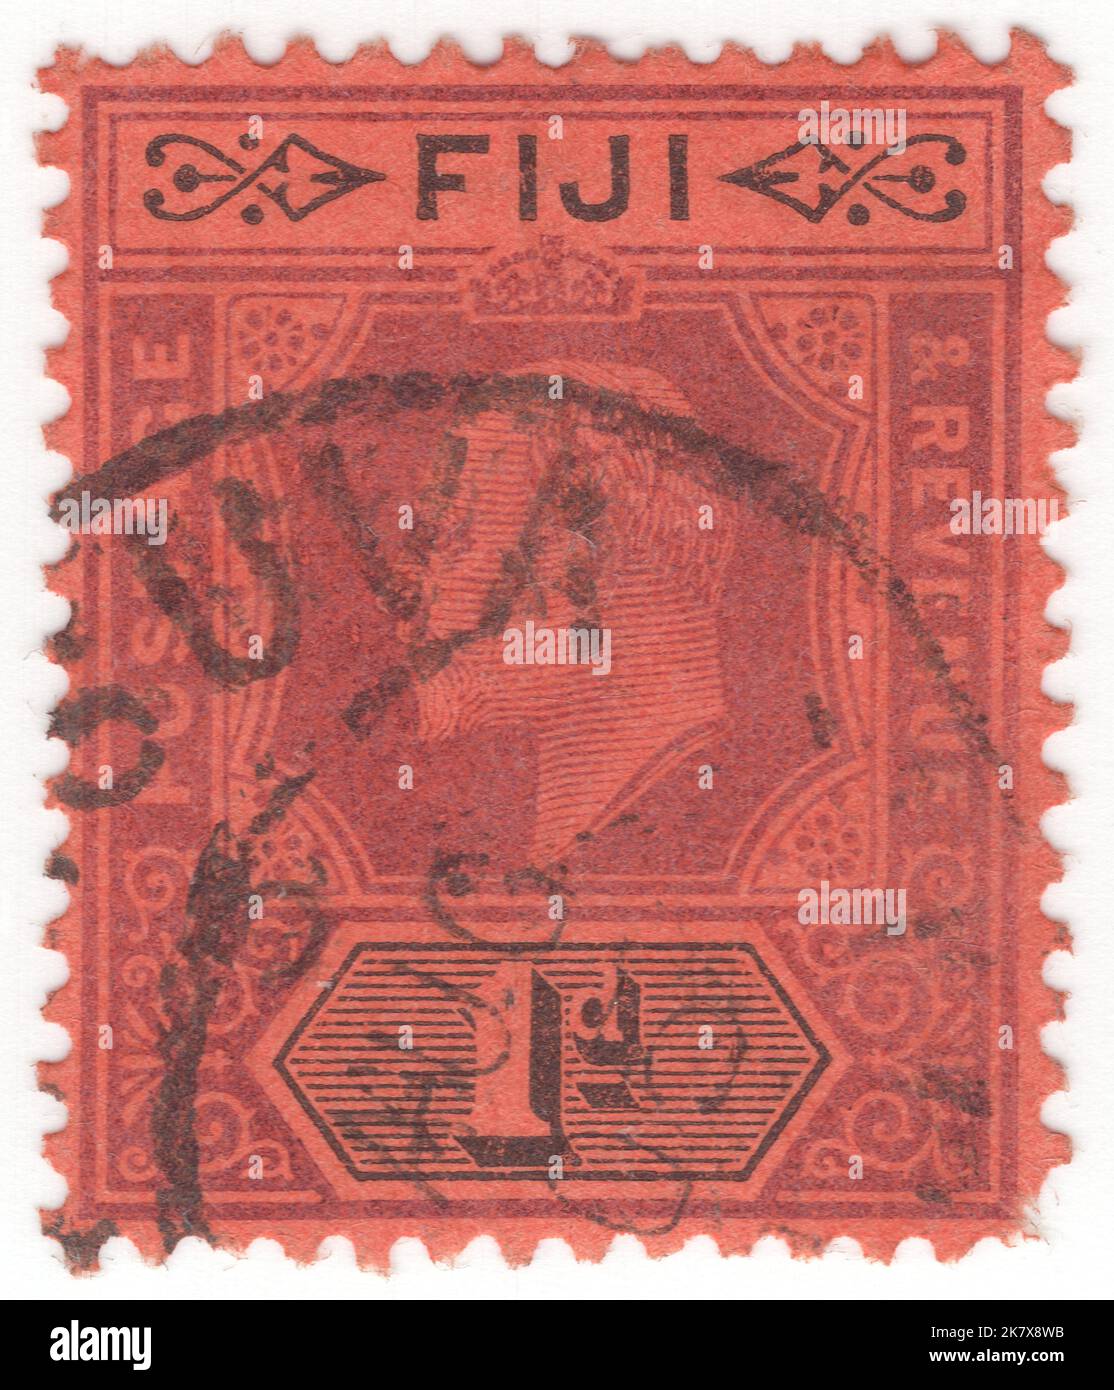 FIJI - 1903 February 1: An 1 pence black and violet on red postage stamp depicting portrait of King Edward VII Stock Photo